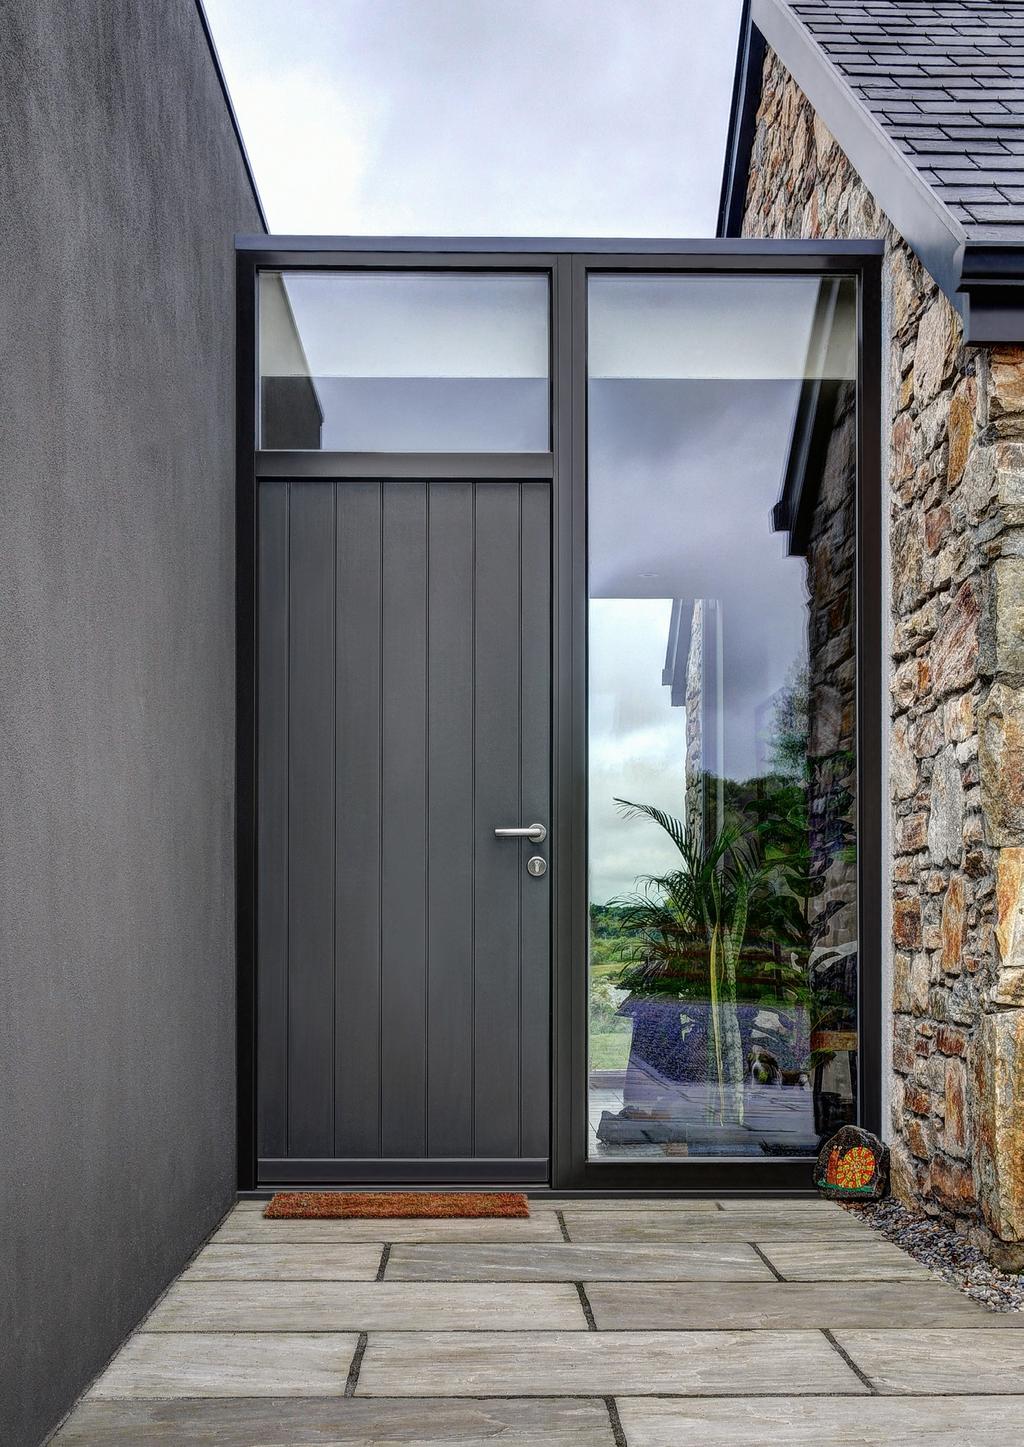 Contemporary entrance doors are constructed using multi-layered panels of hardwood, with metal inserts.